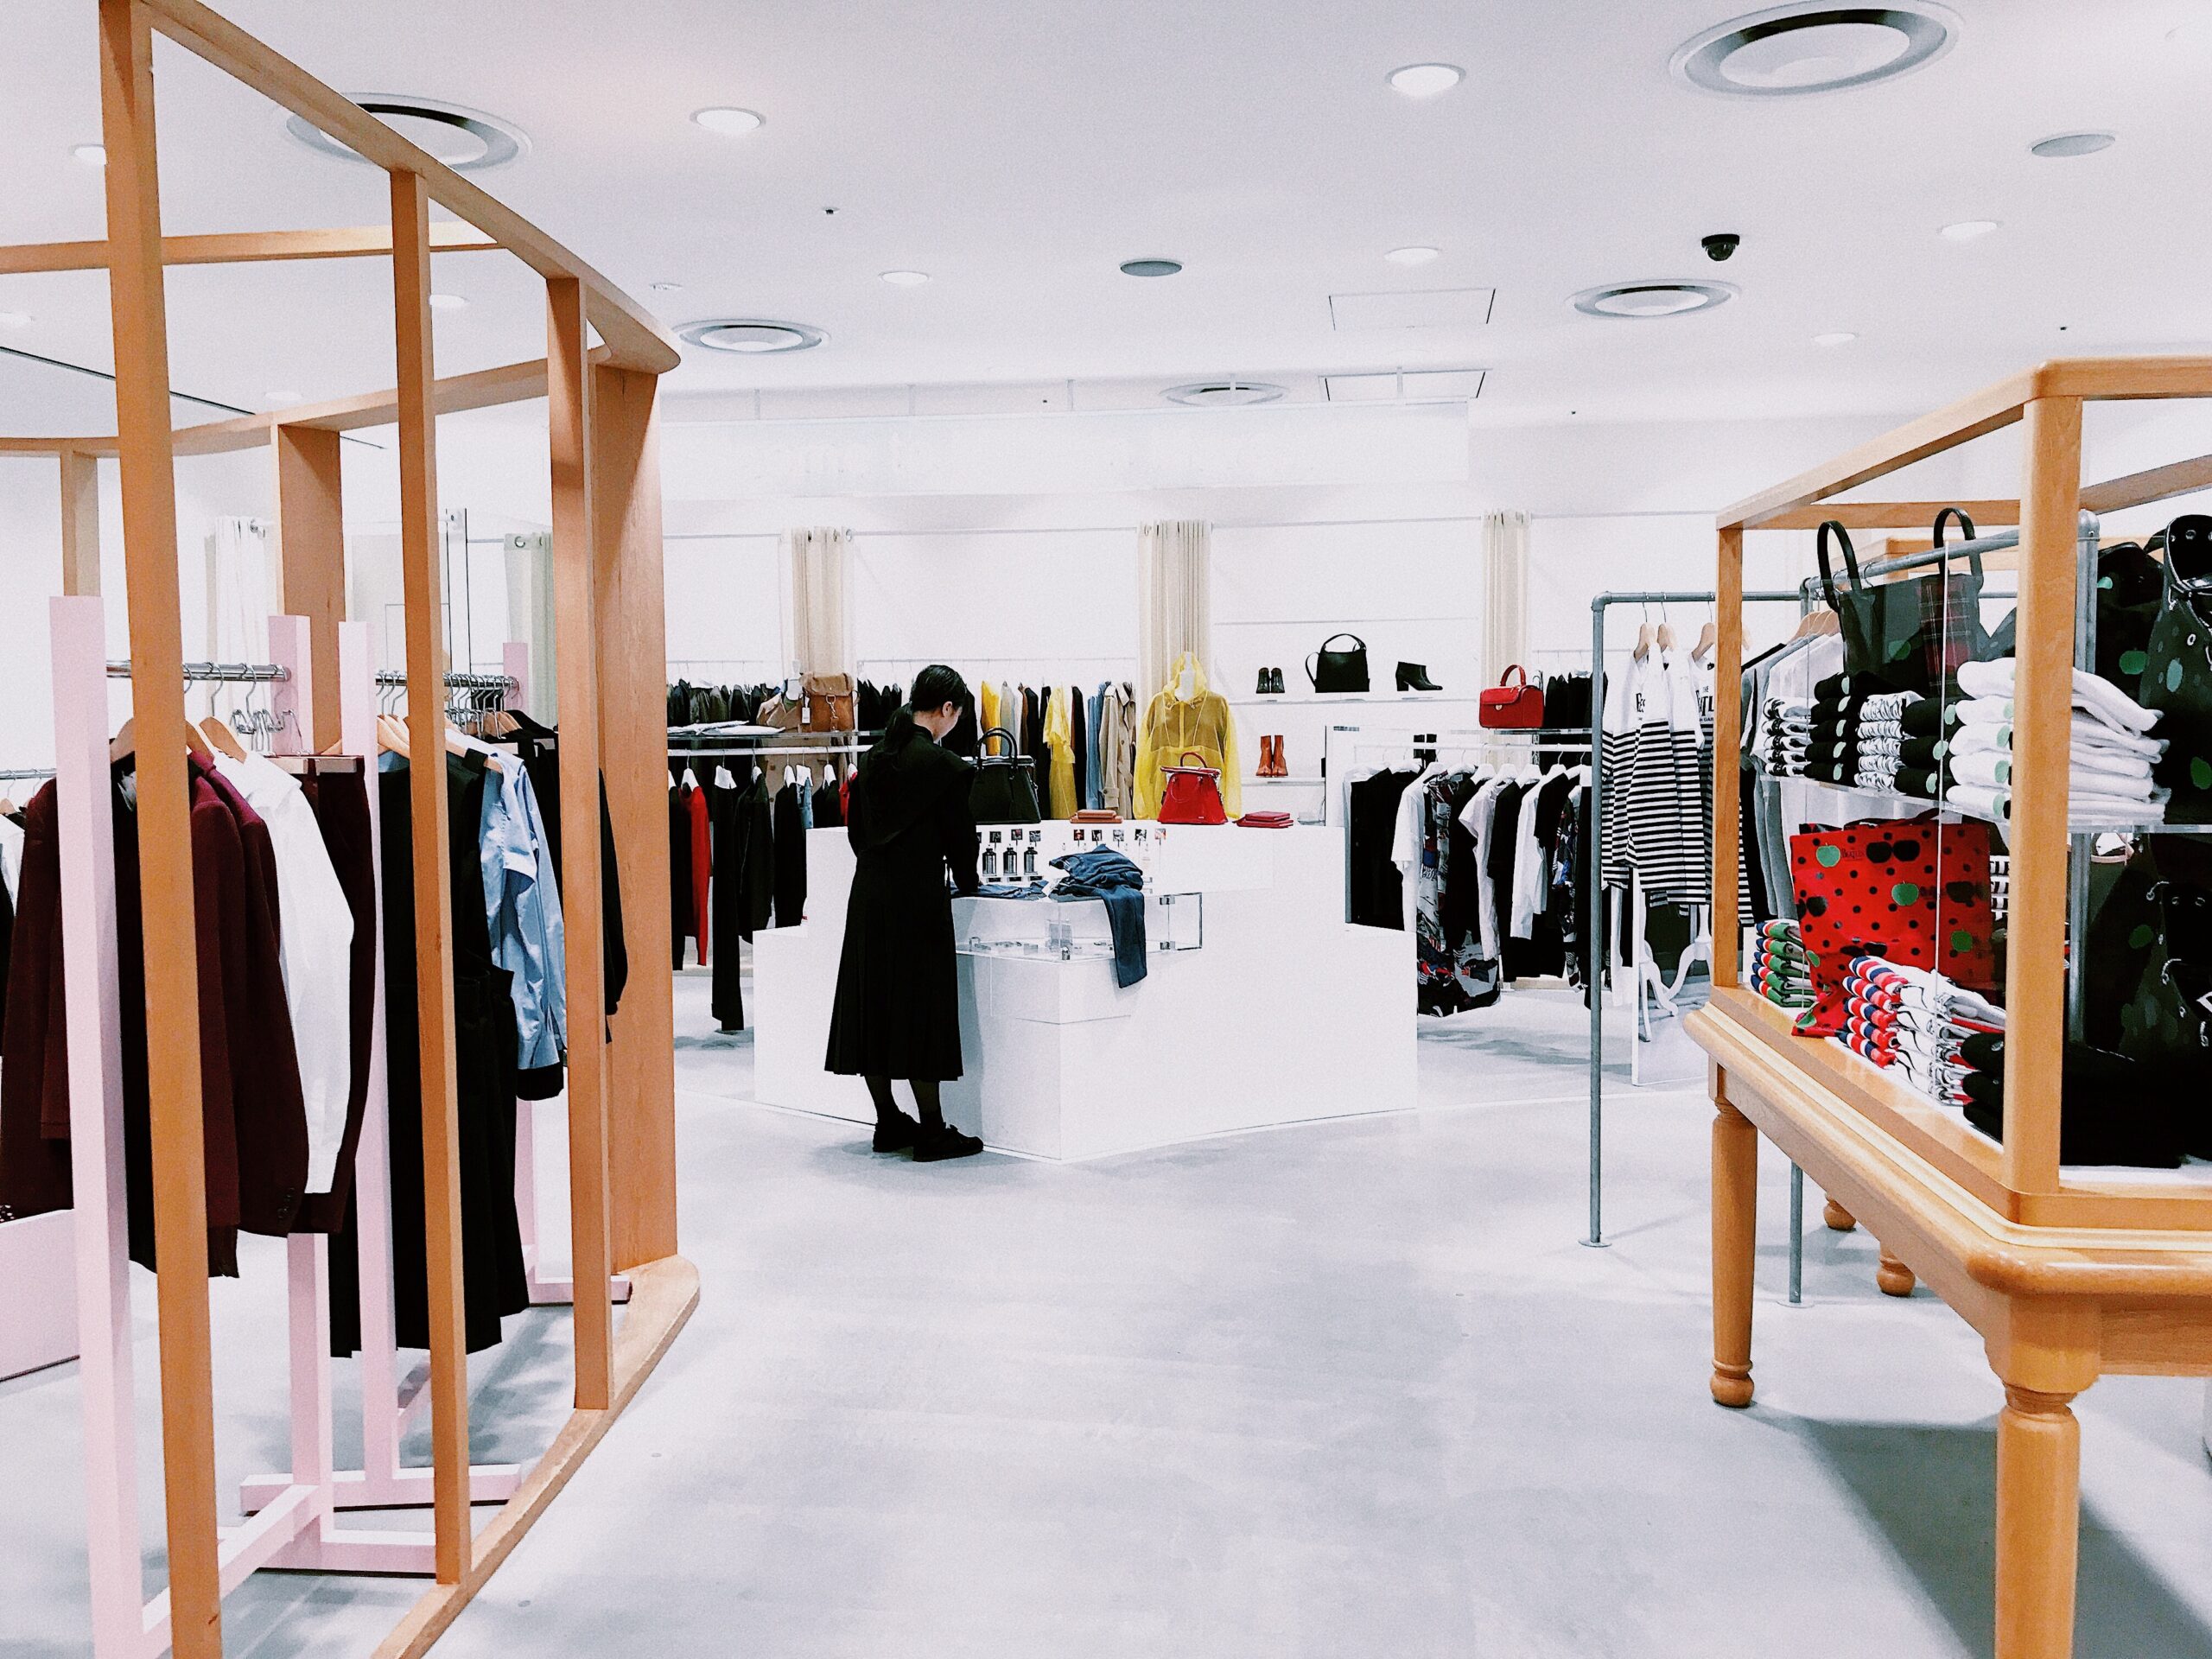 Brick-And-Mortar is Back: 4 Important Questions to Ask When Considering Physical Retail